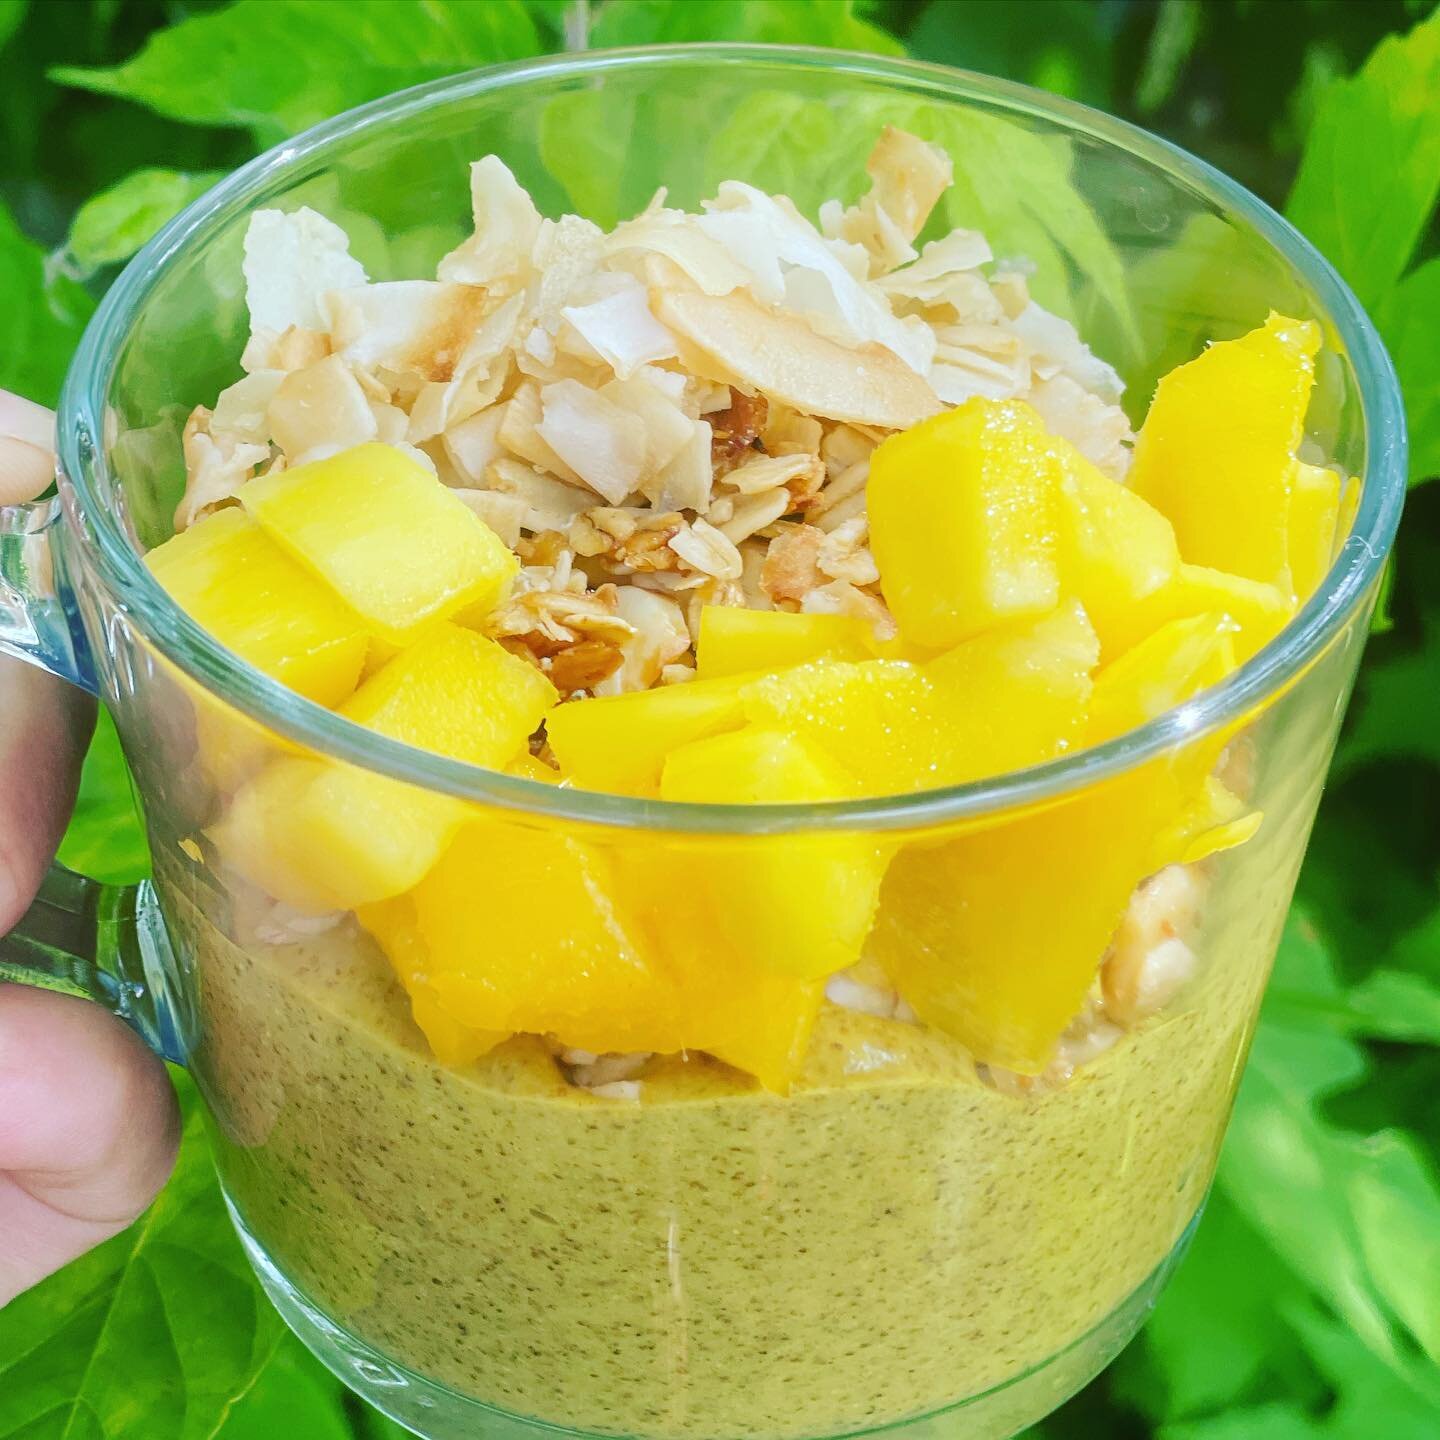 🚨New item alert🚨Not a fan of the texture of chia pudding? Try our new blended chia mango and turmeric pudding. All the health benefits and no seeds stuck in your teeth😁 Try our new grab and go hummus and dairy free tzatziki veggie tray. #sagehealt